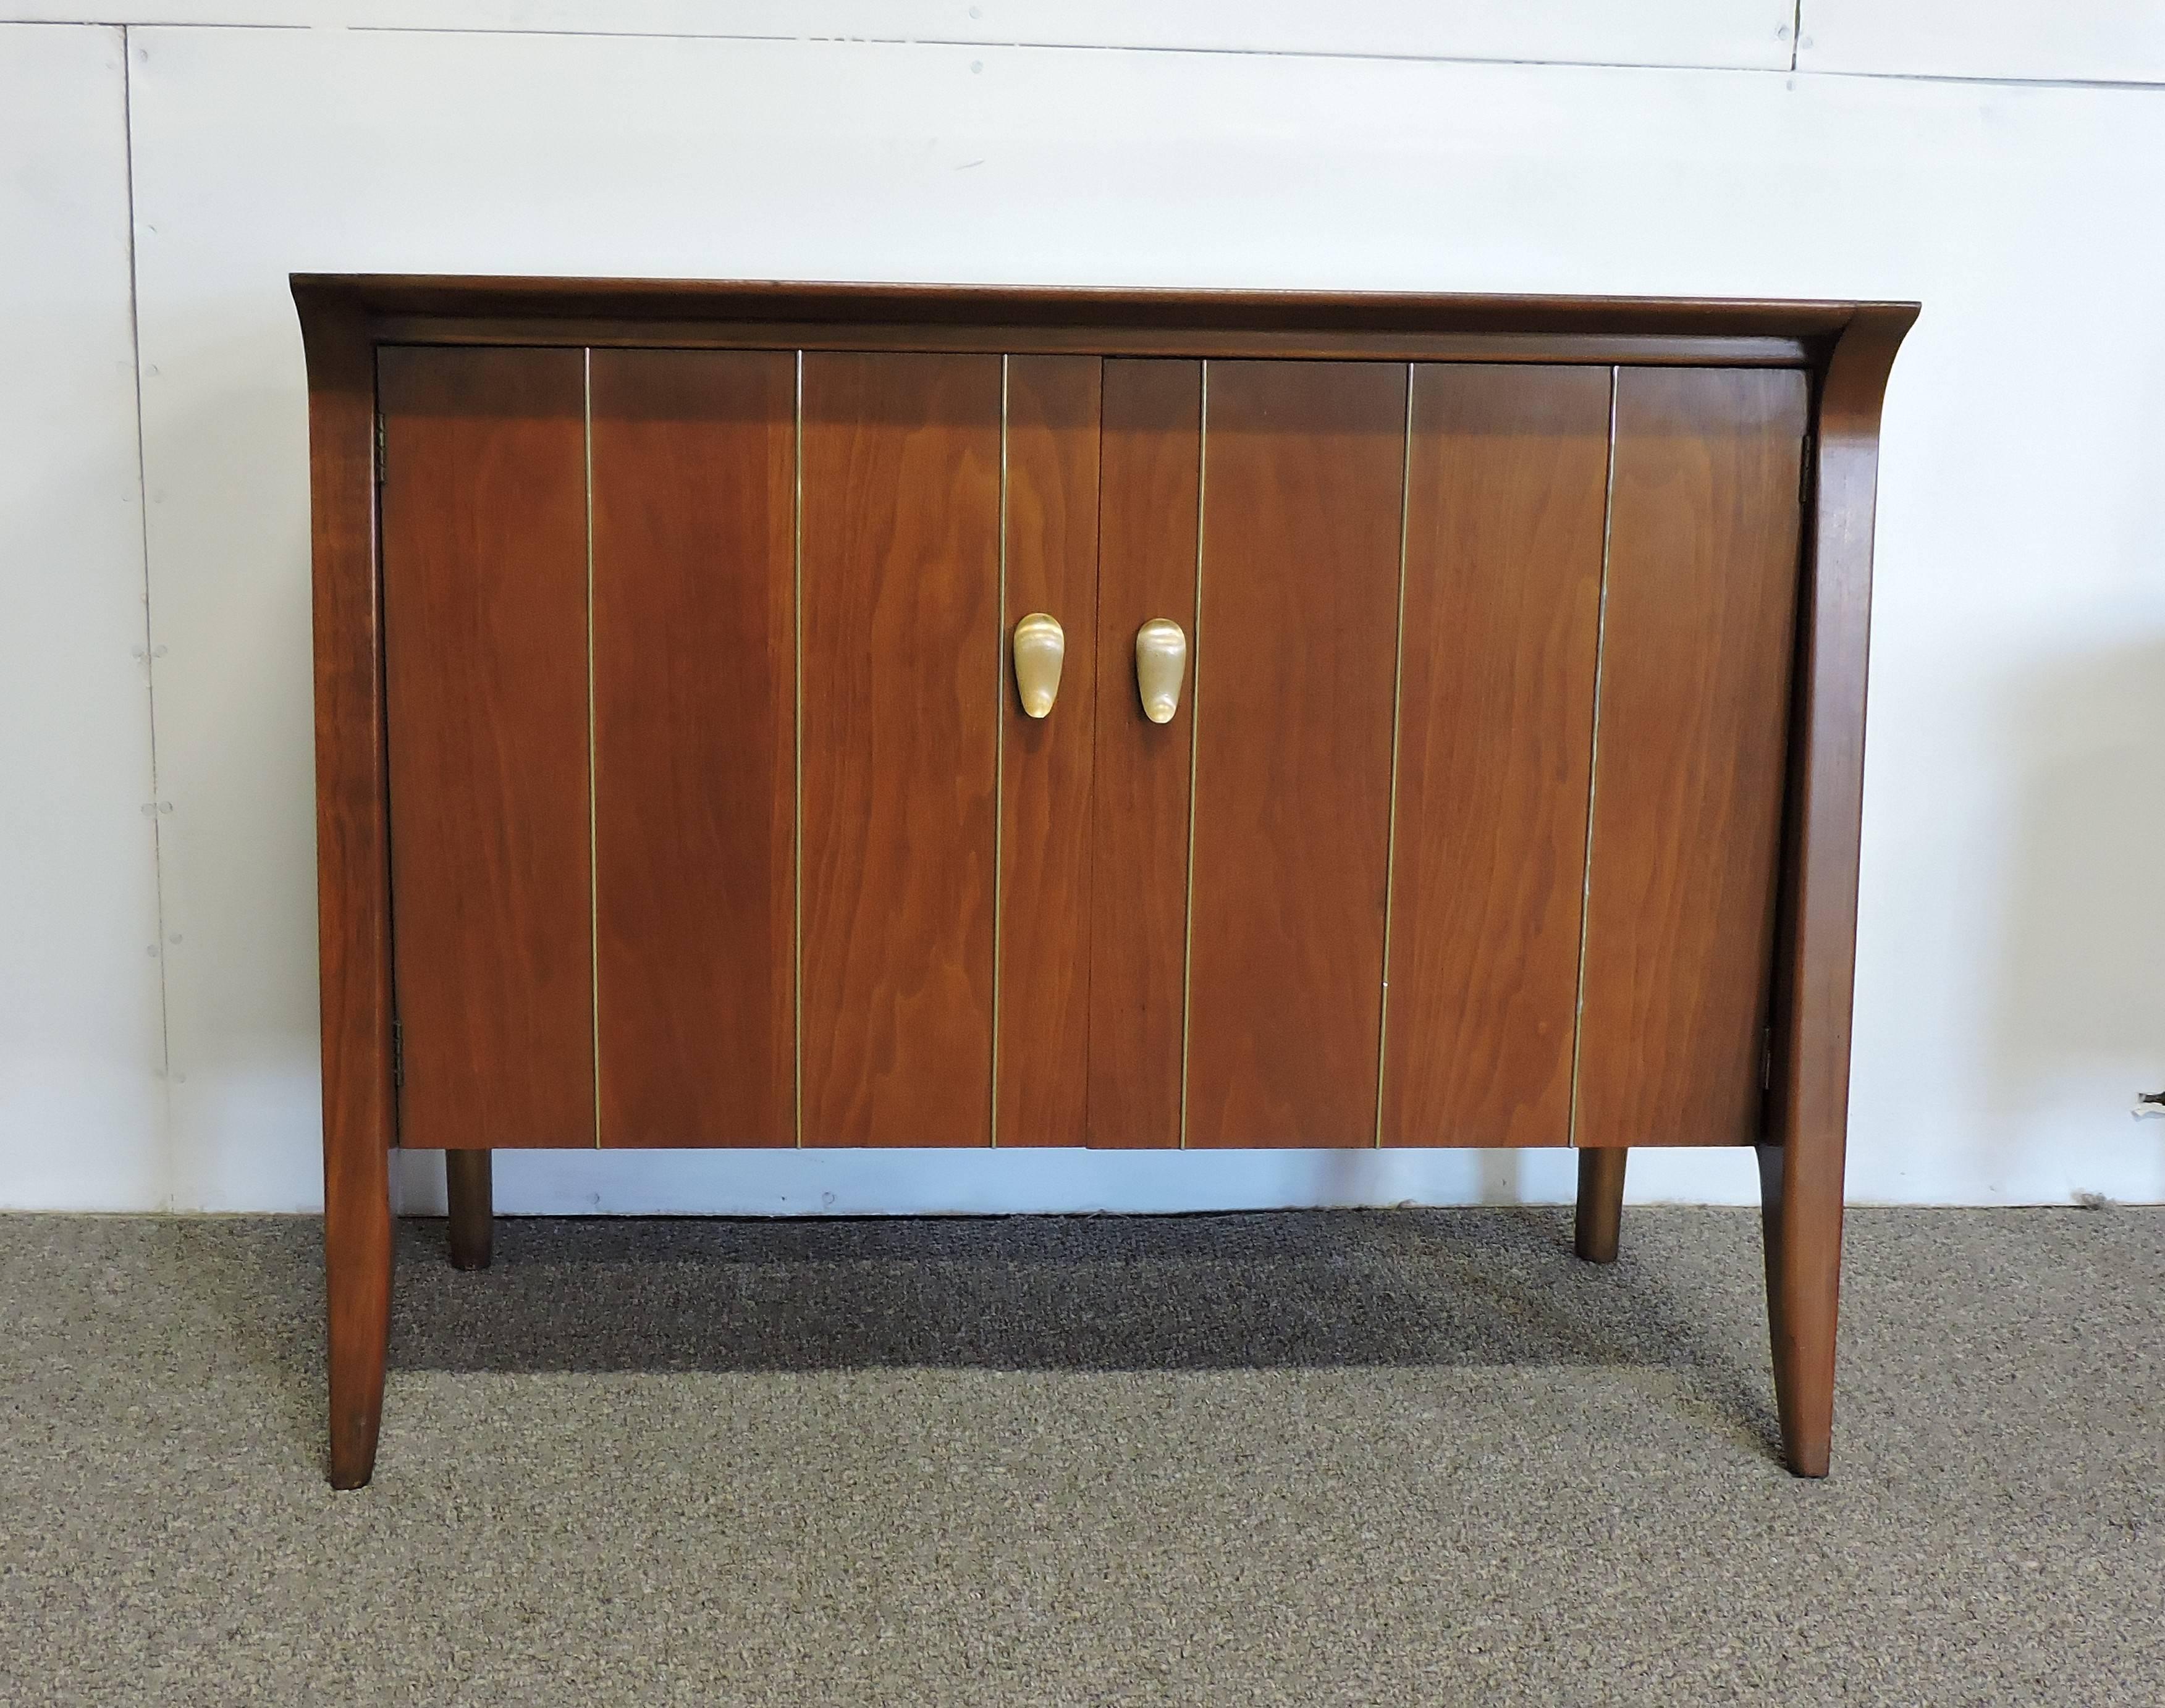 Beautiful Mid-Century walnut cabinet designed by Jon Van Koert and made by high quality furniture maker, Drexel. This cabinet was part of its profile collection which was made between 1955-1961. This cabinet has a unique look with an angled design,